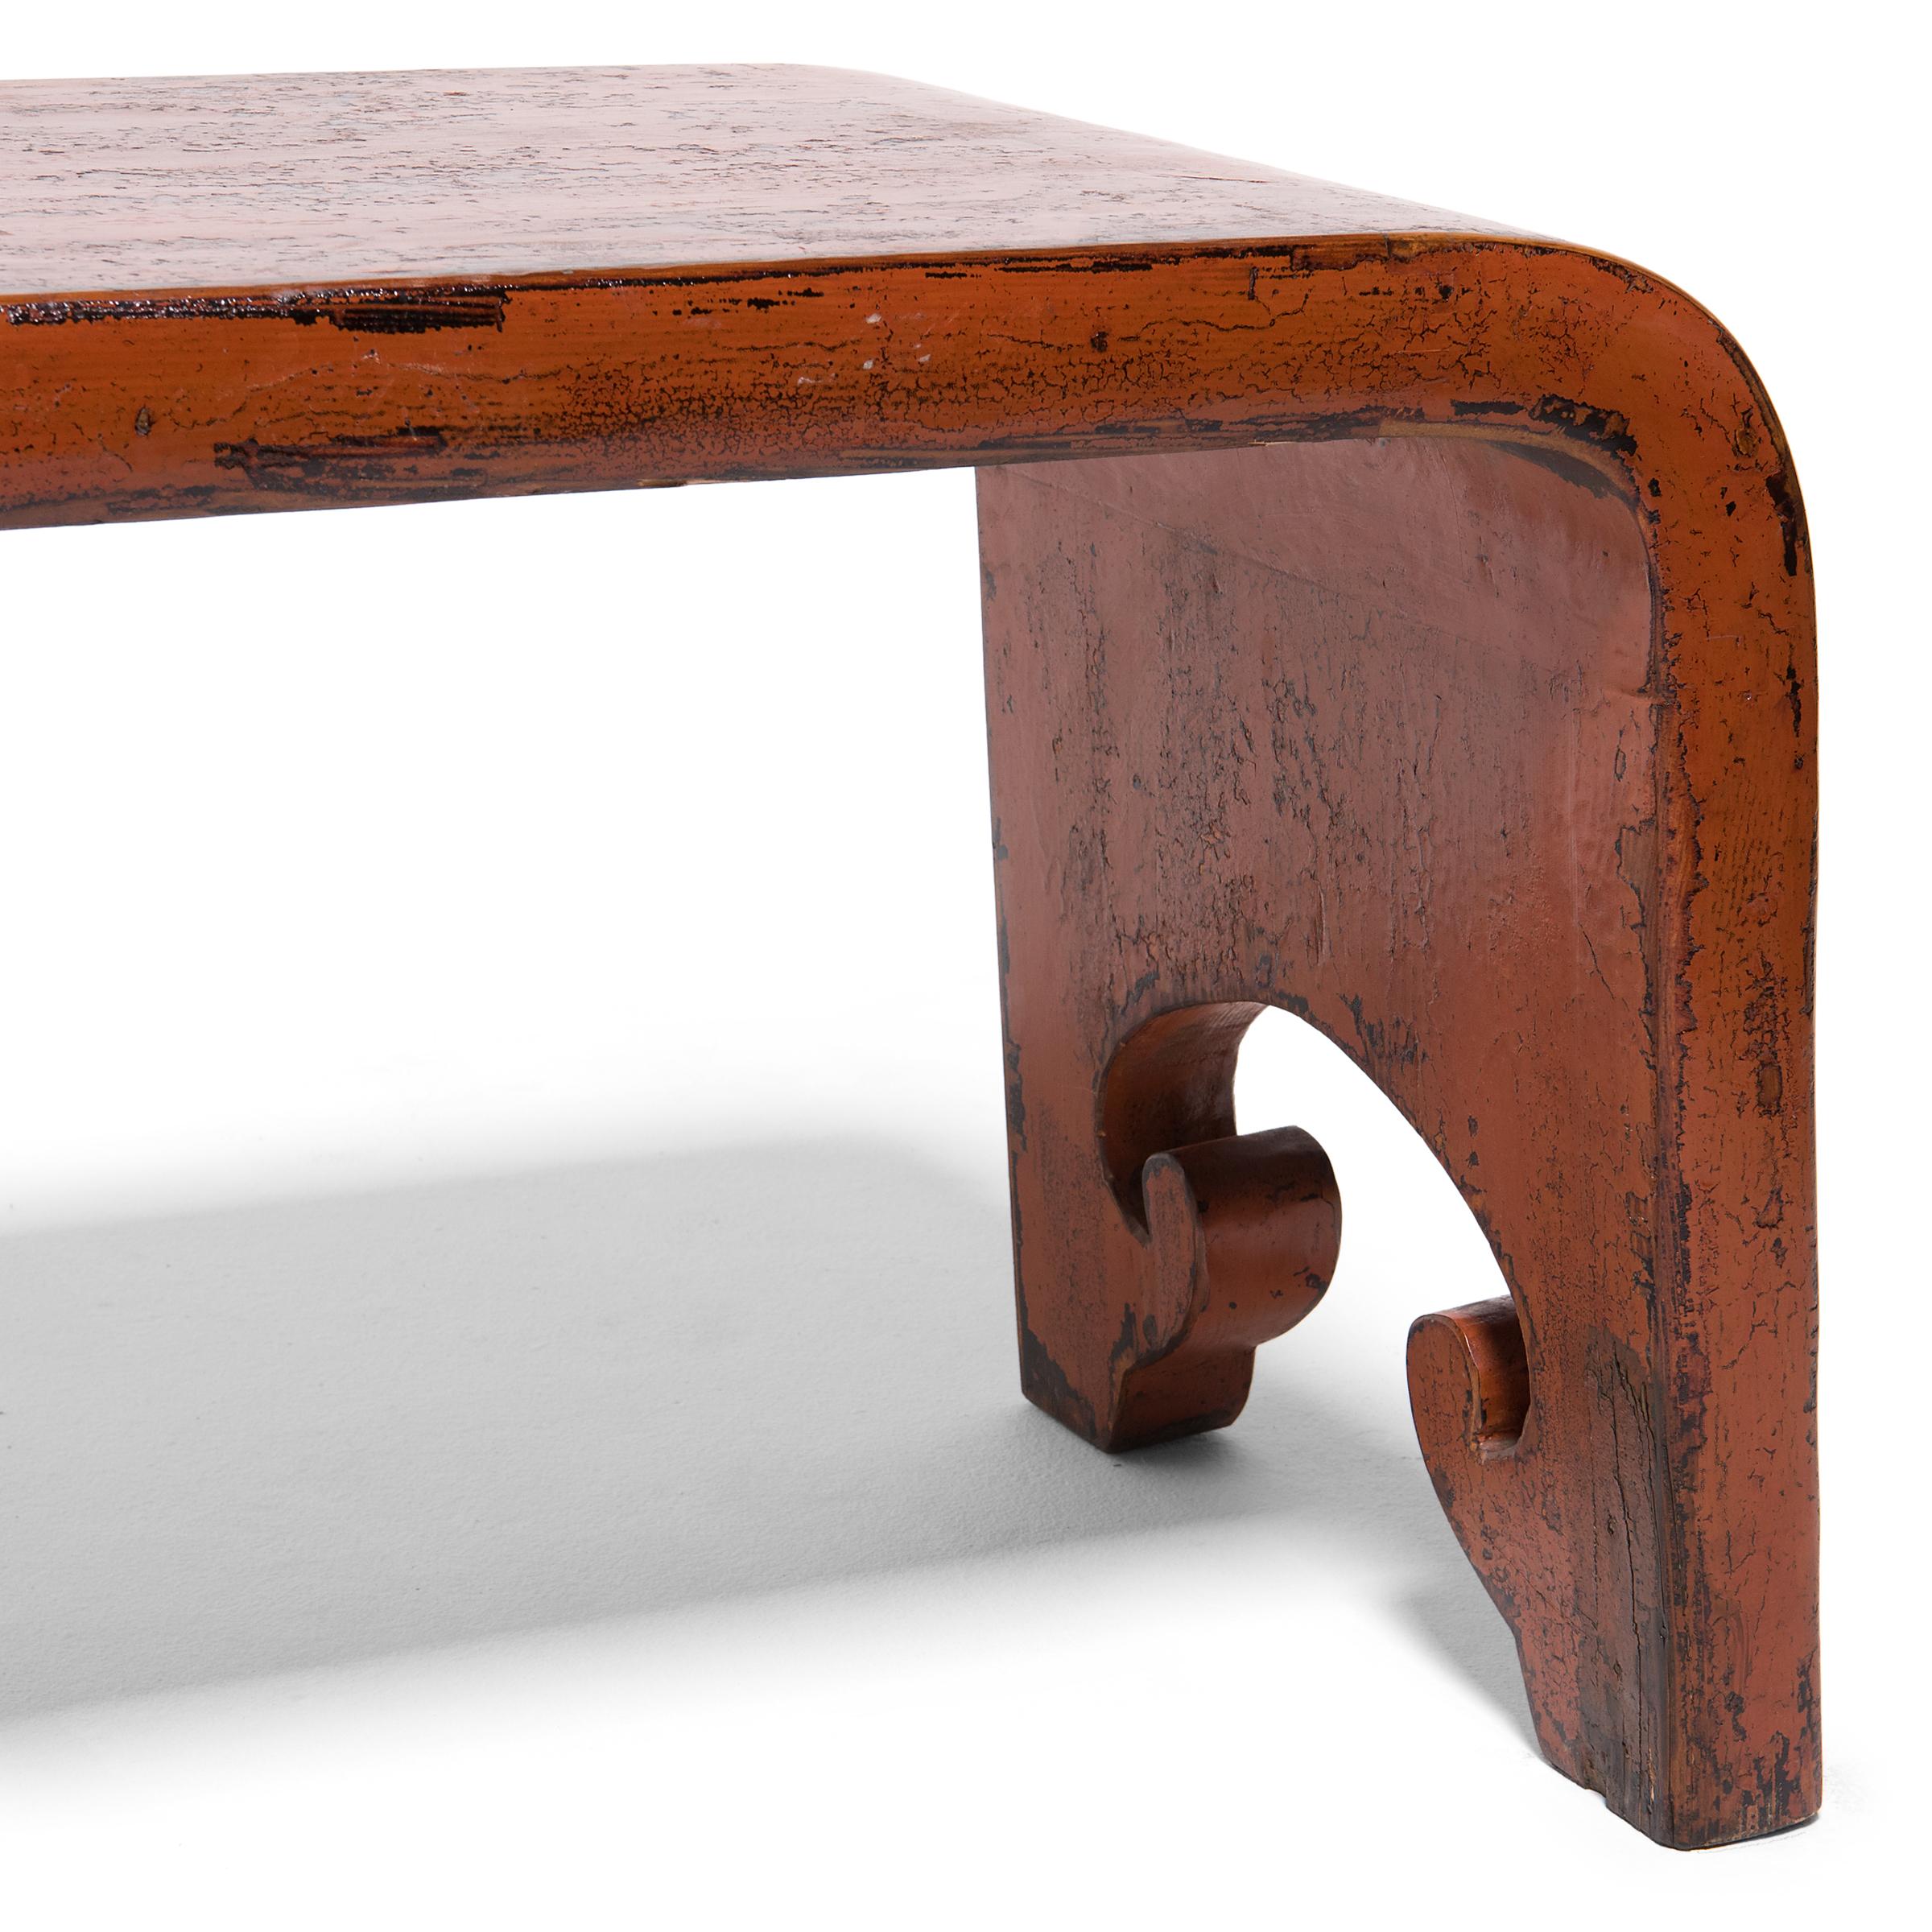 20th Century Monumental Chinese Persimmon Ribbon Table, c. 1900